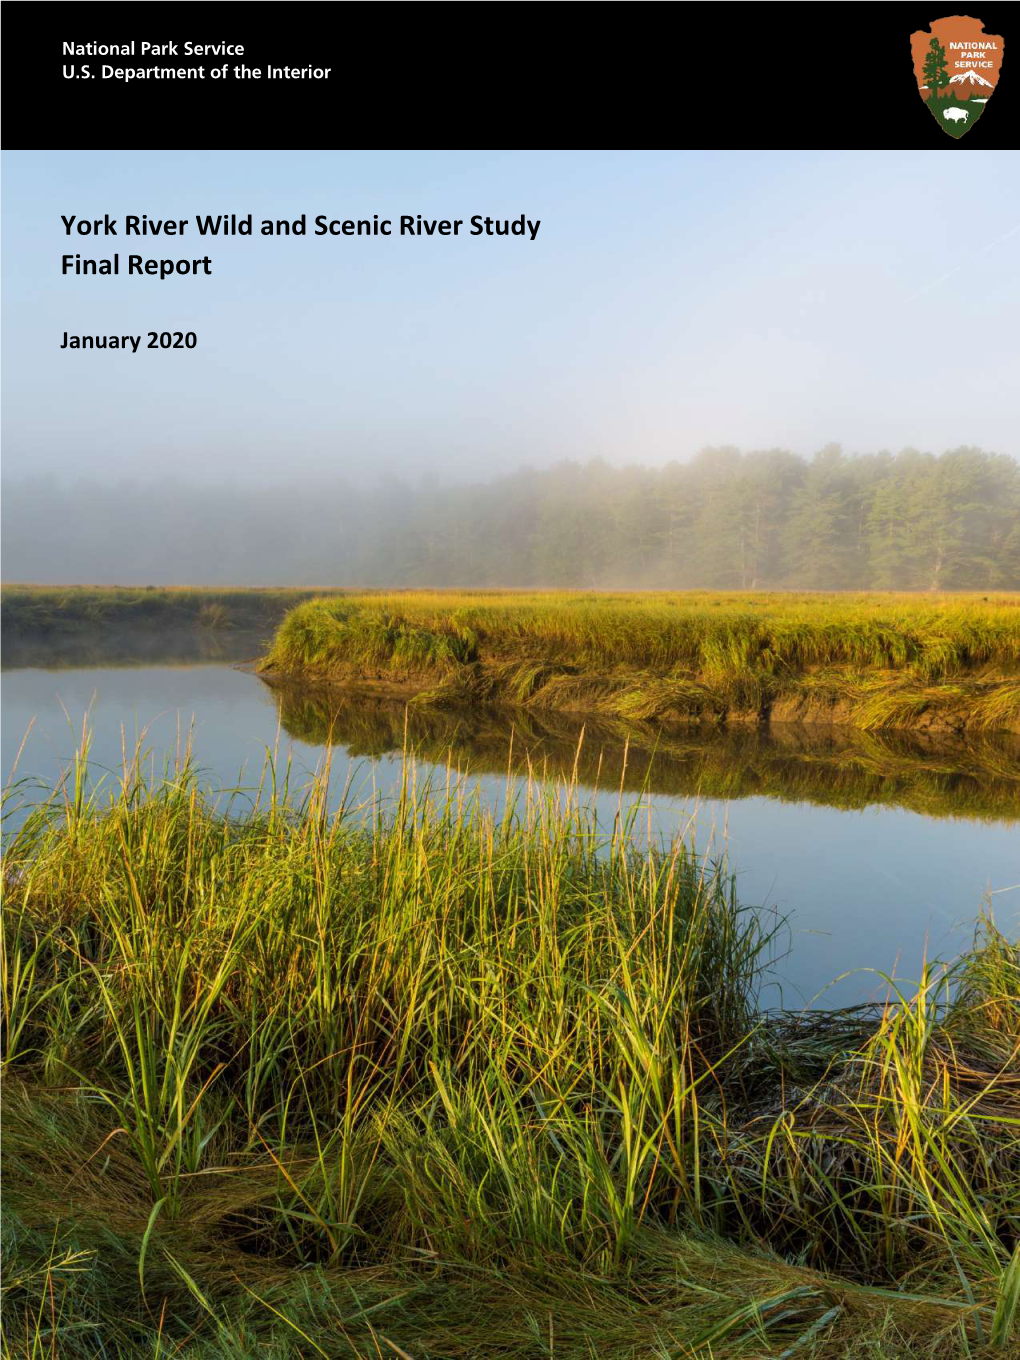 York River Wild and Scenic River Study Final Report